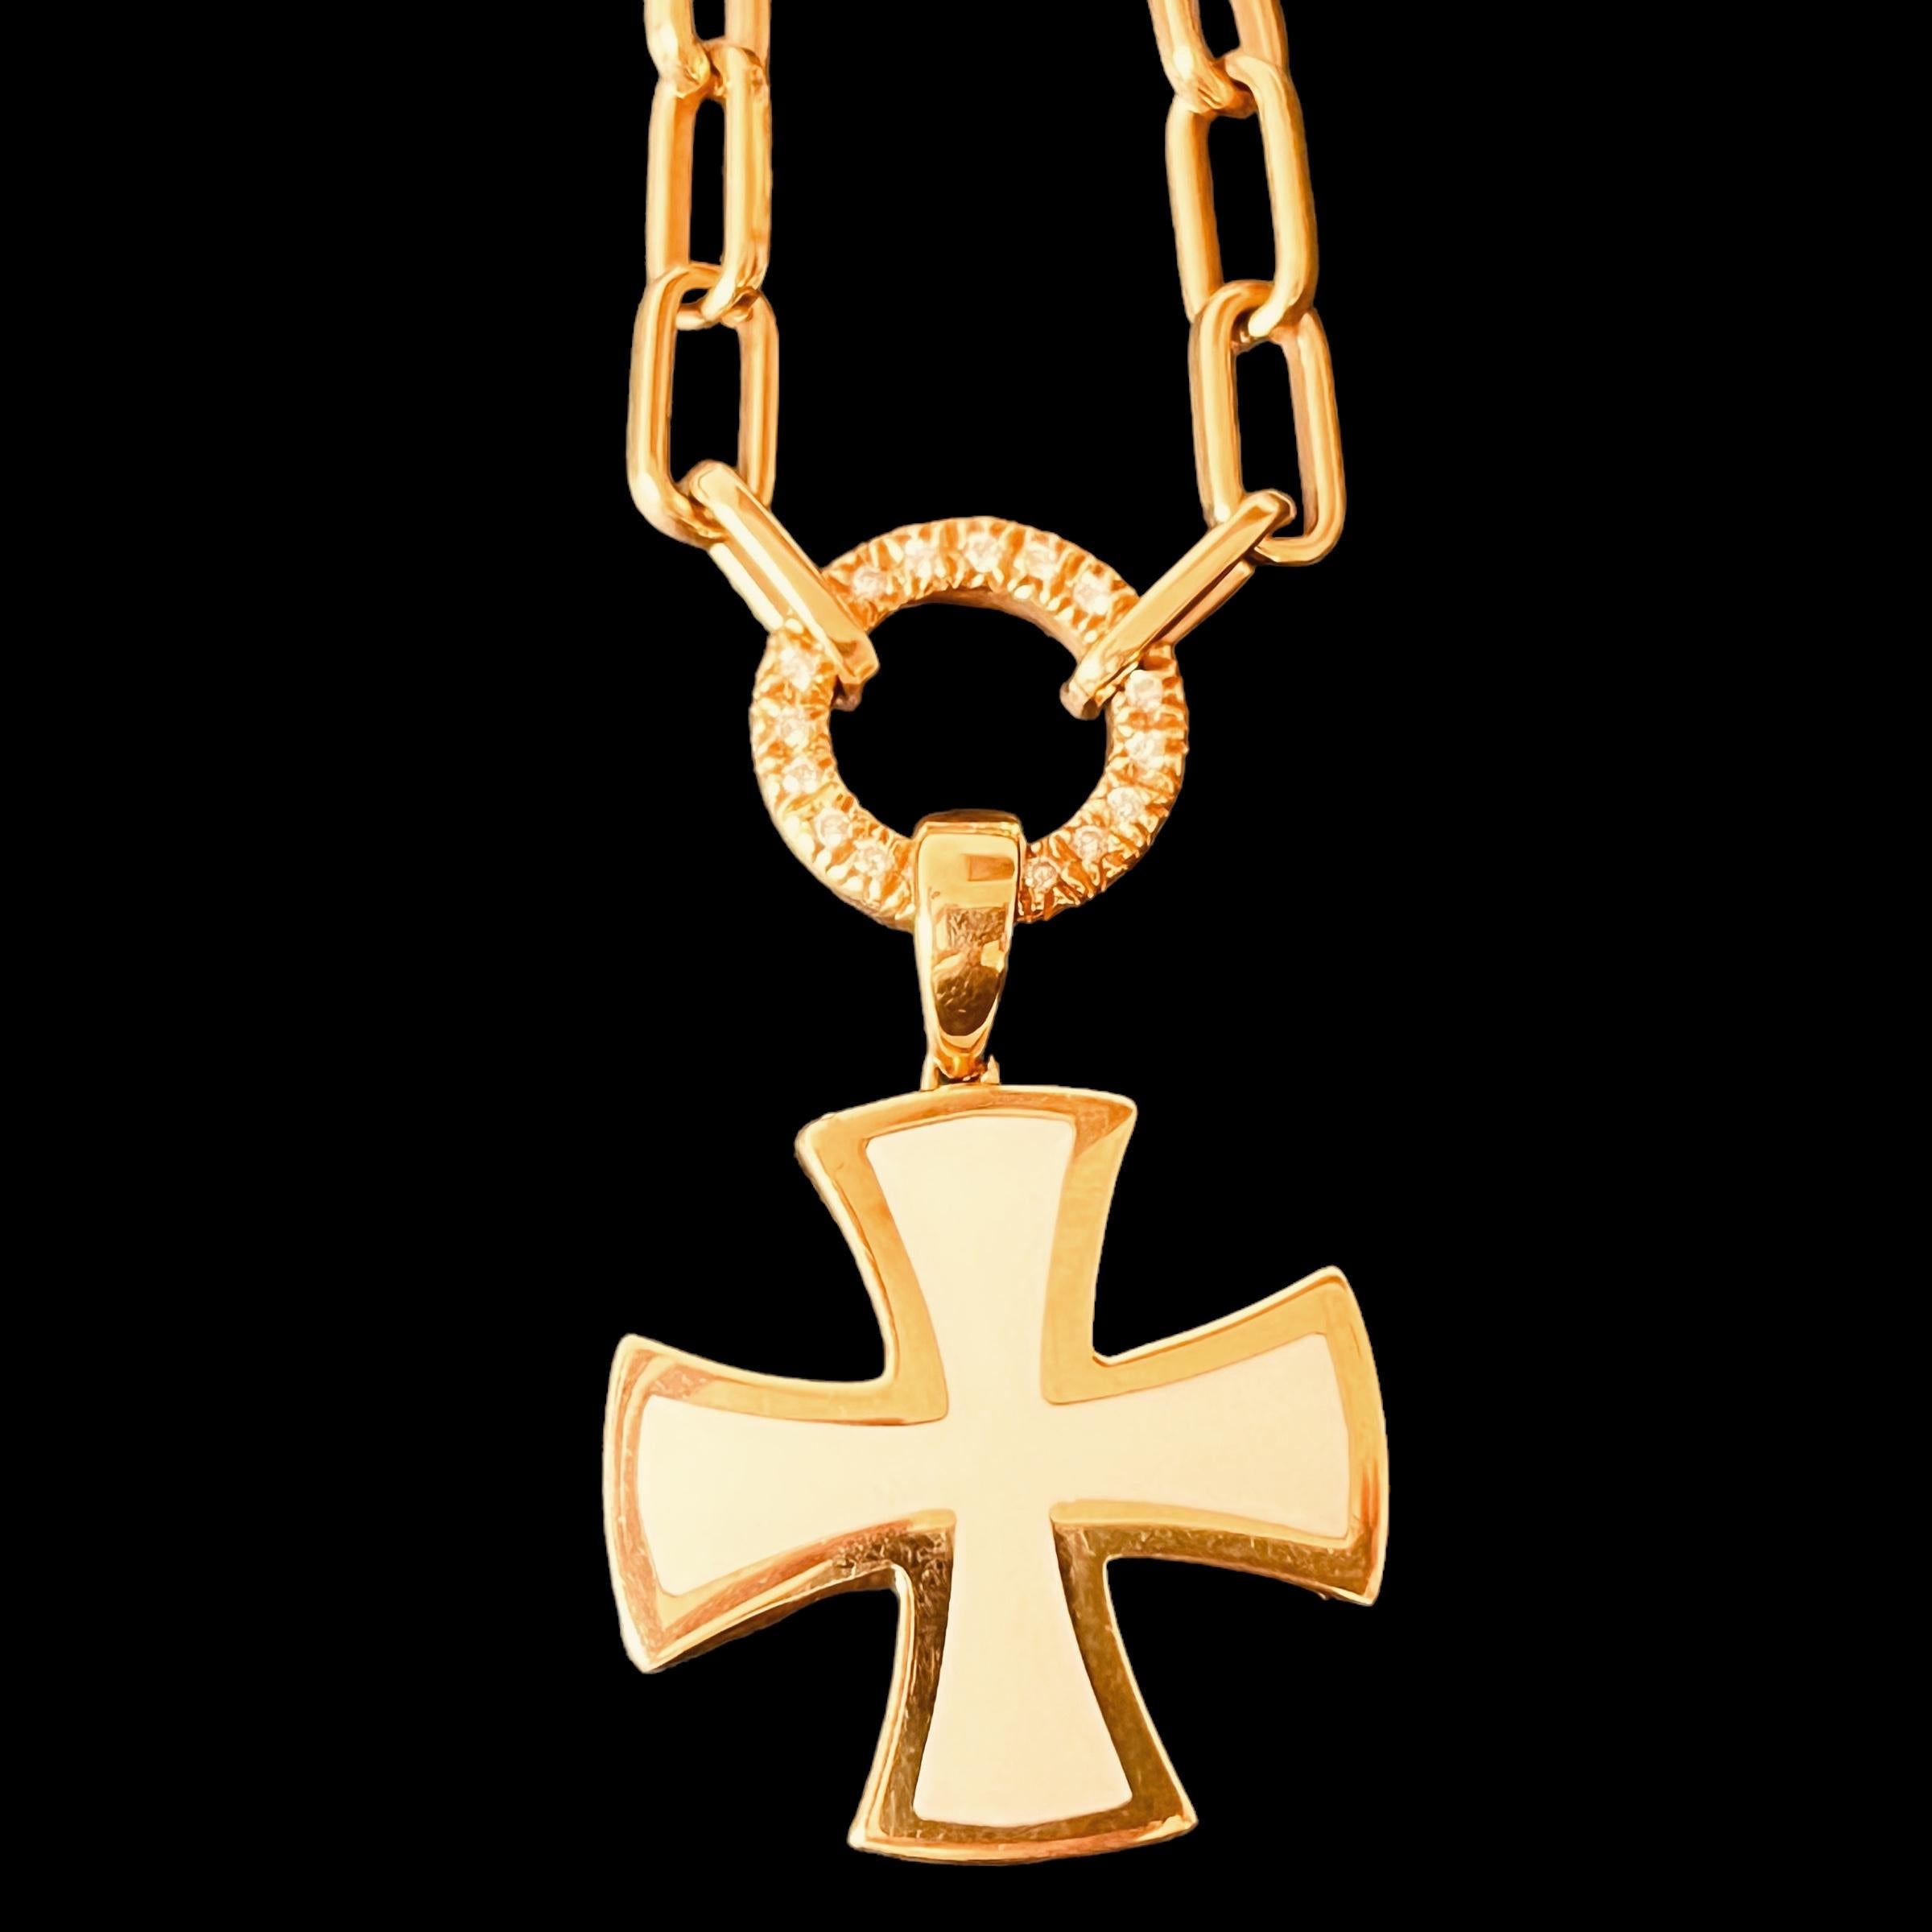 18 Carat Gold Chain Connected To A Diamond Suspended Ring & Enamel Cross Pendant For Sale 7